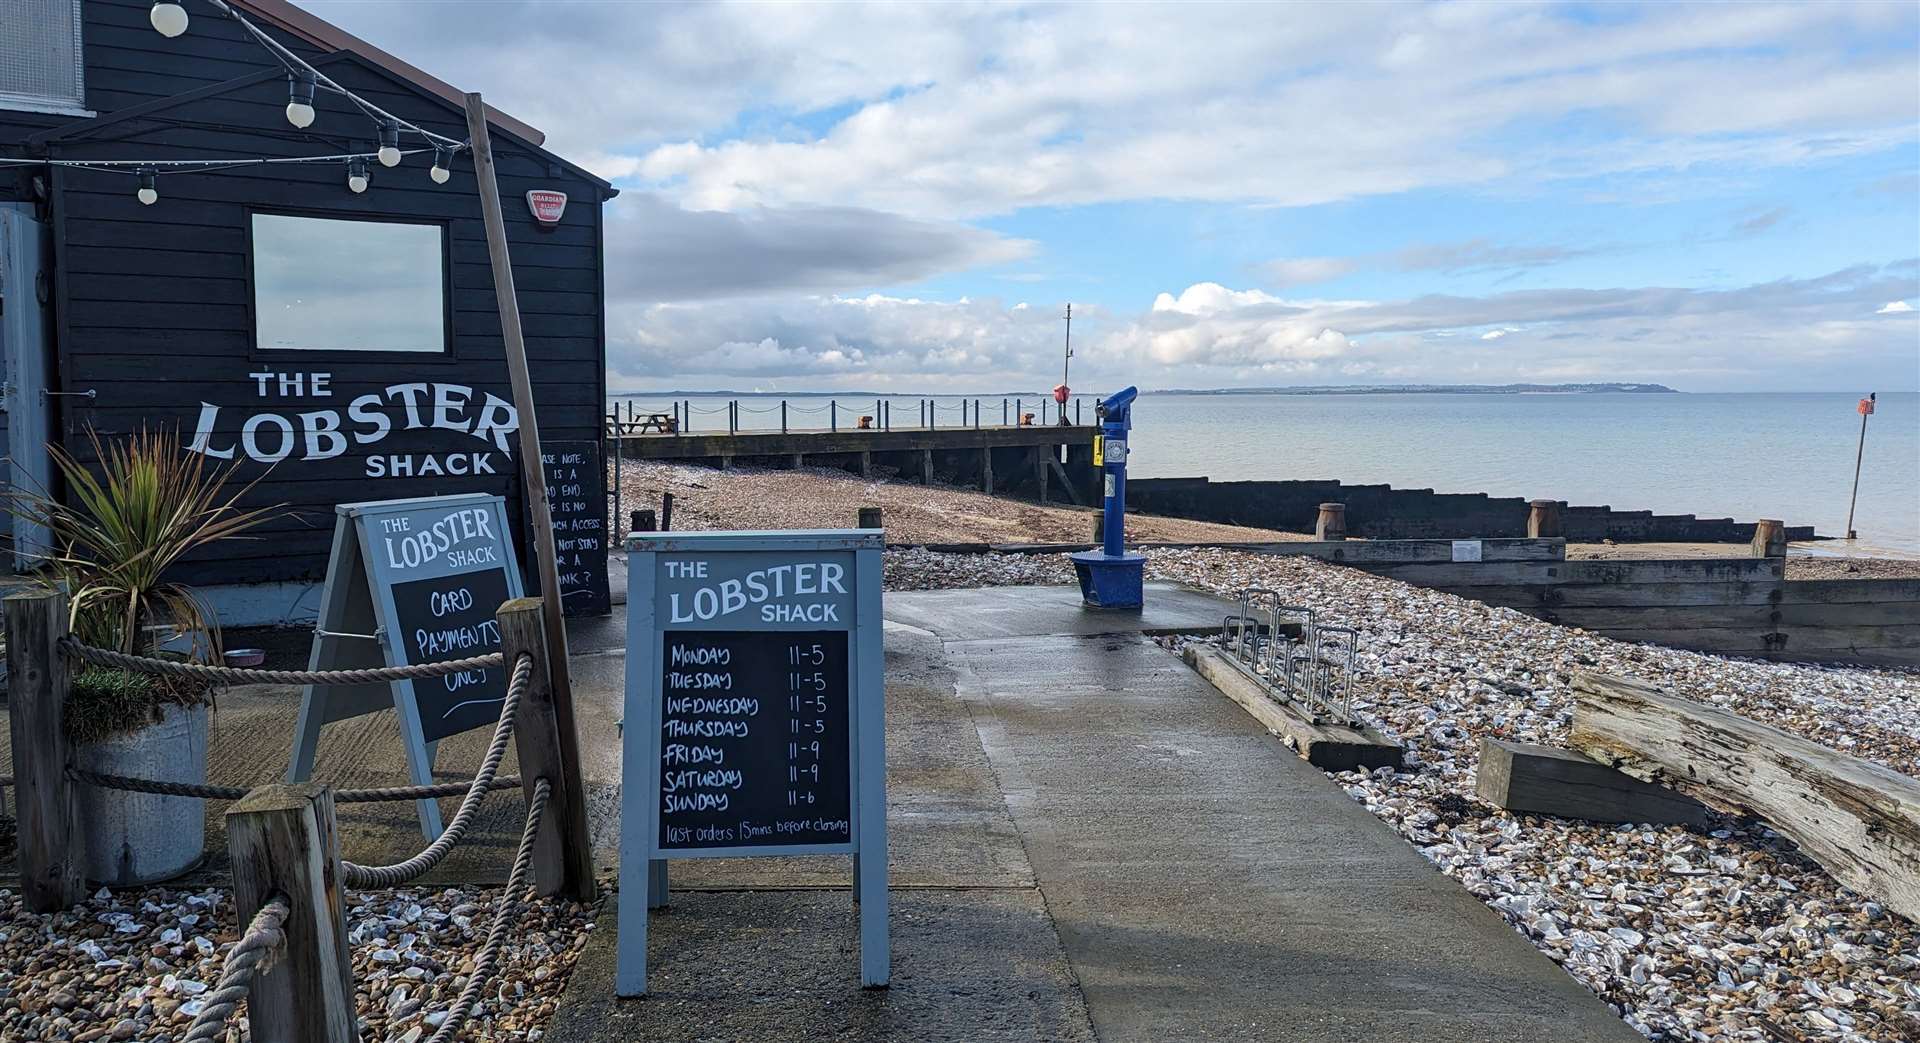 The Lobster Shack in Whitstable